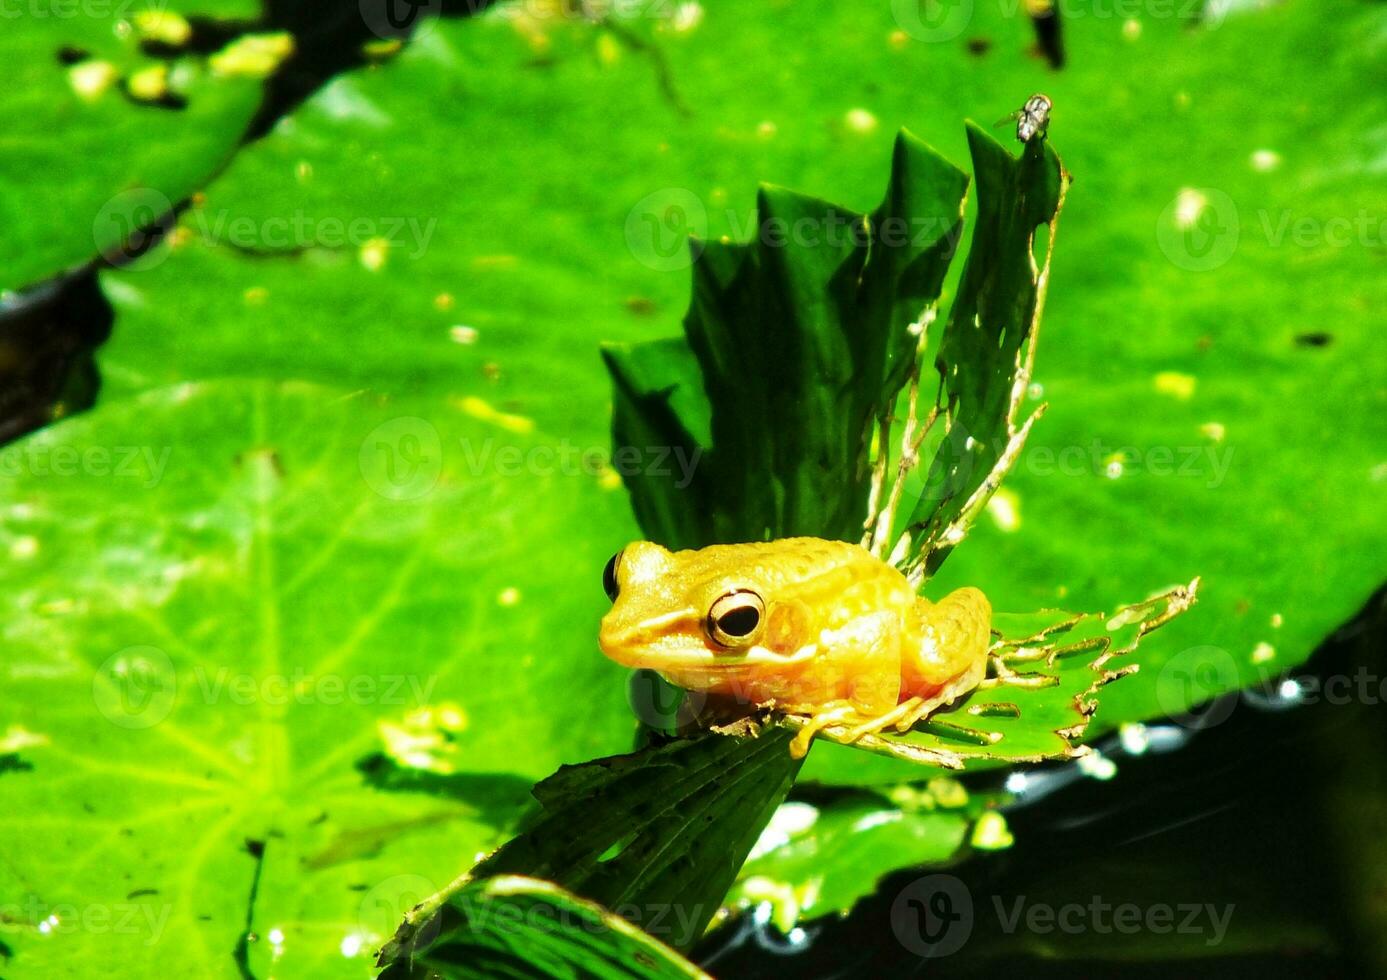 Marsh frog on water lily leaves. Amphibian creature. Outdoor pond with lotus leaf on sunny days. Beauty of nature. Portrait of little cute frog sitting on green leaf photo